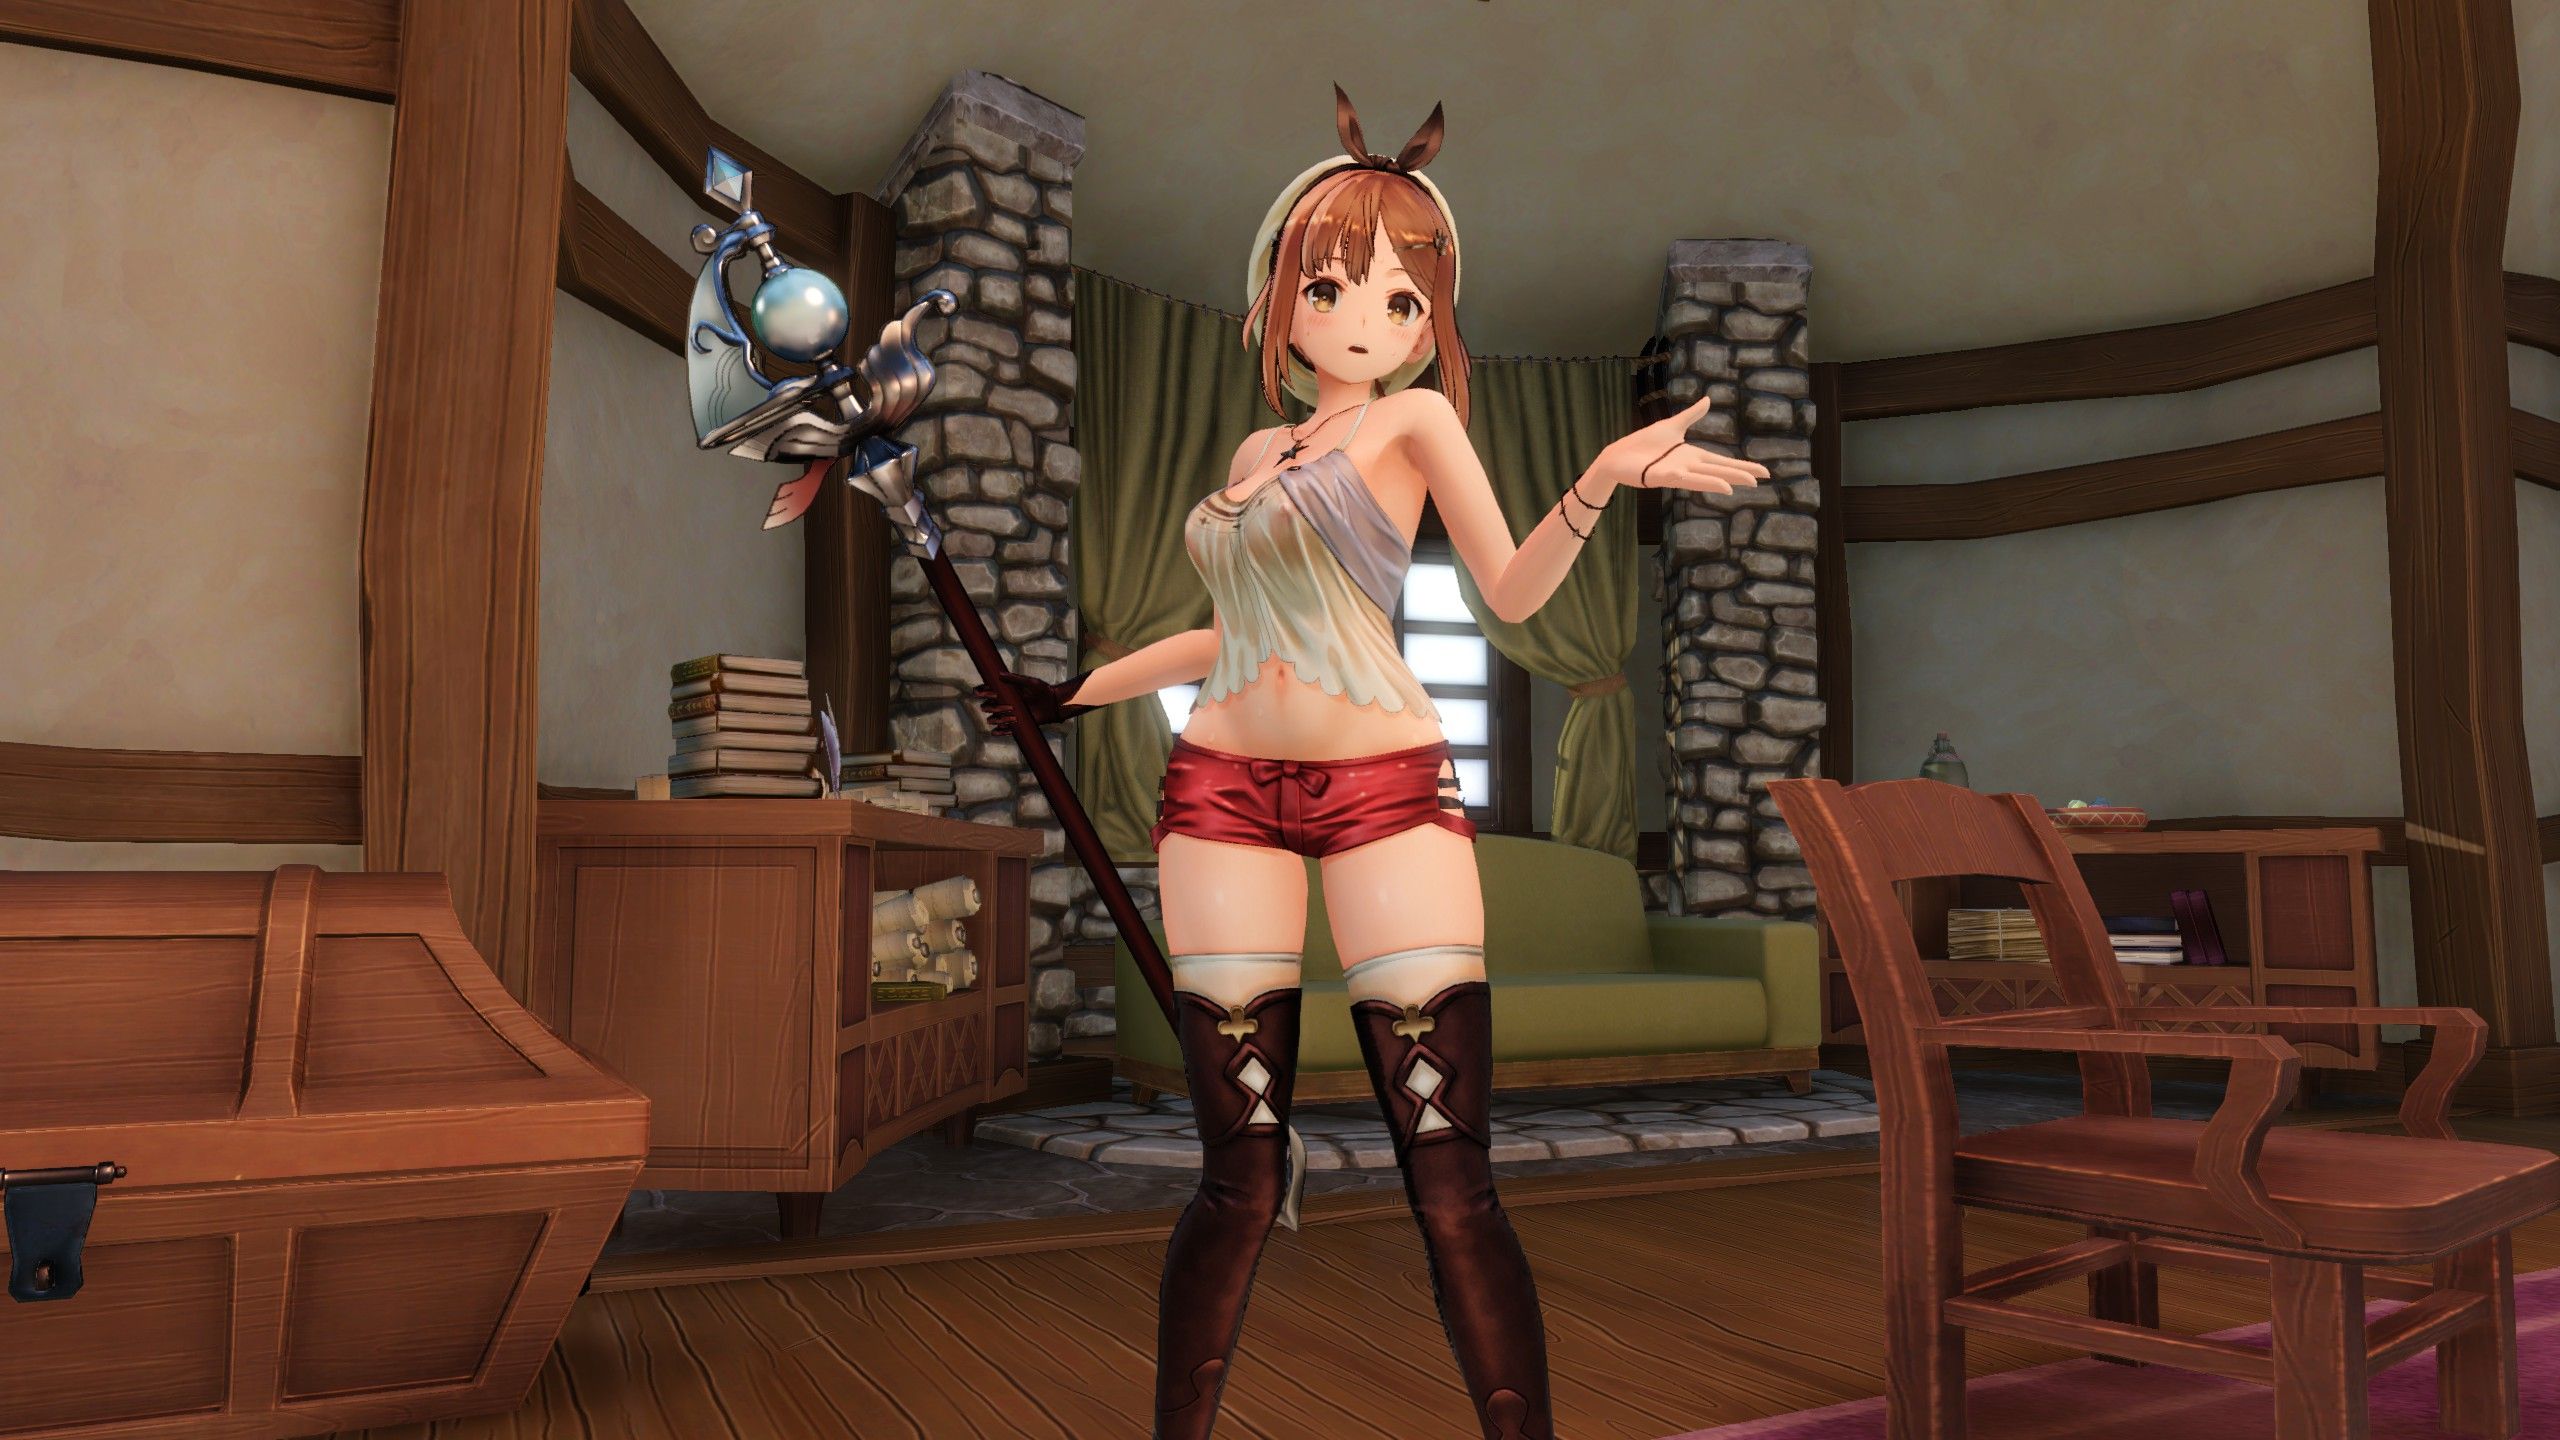 Buy a PC version liza atelier but also spend 2 days to make nipples transparent with erotic MOD ... 10